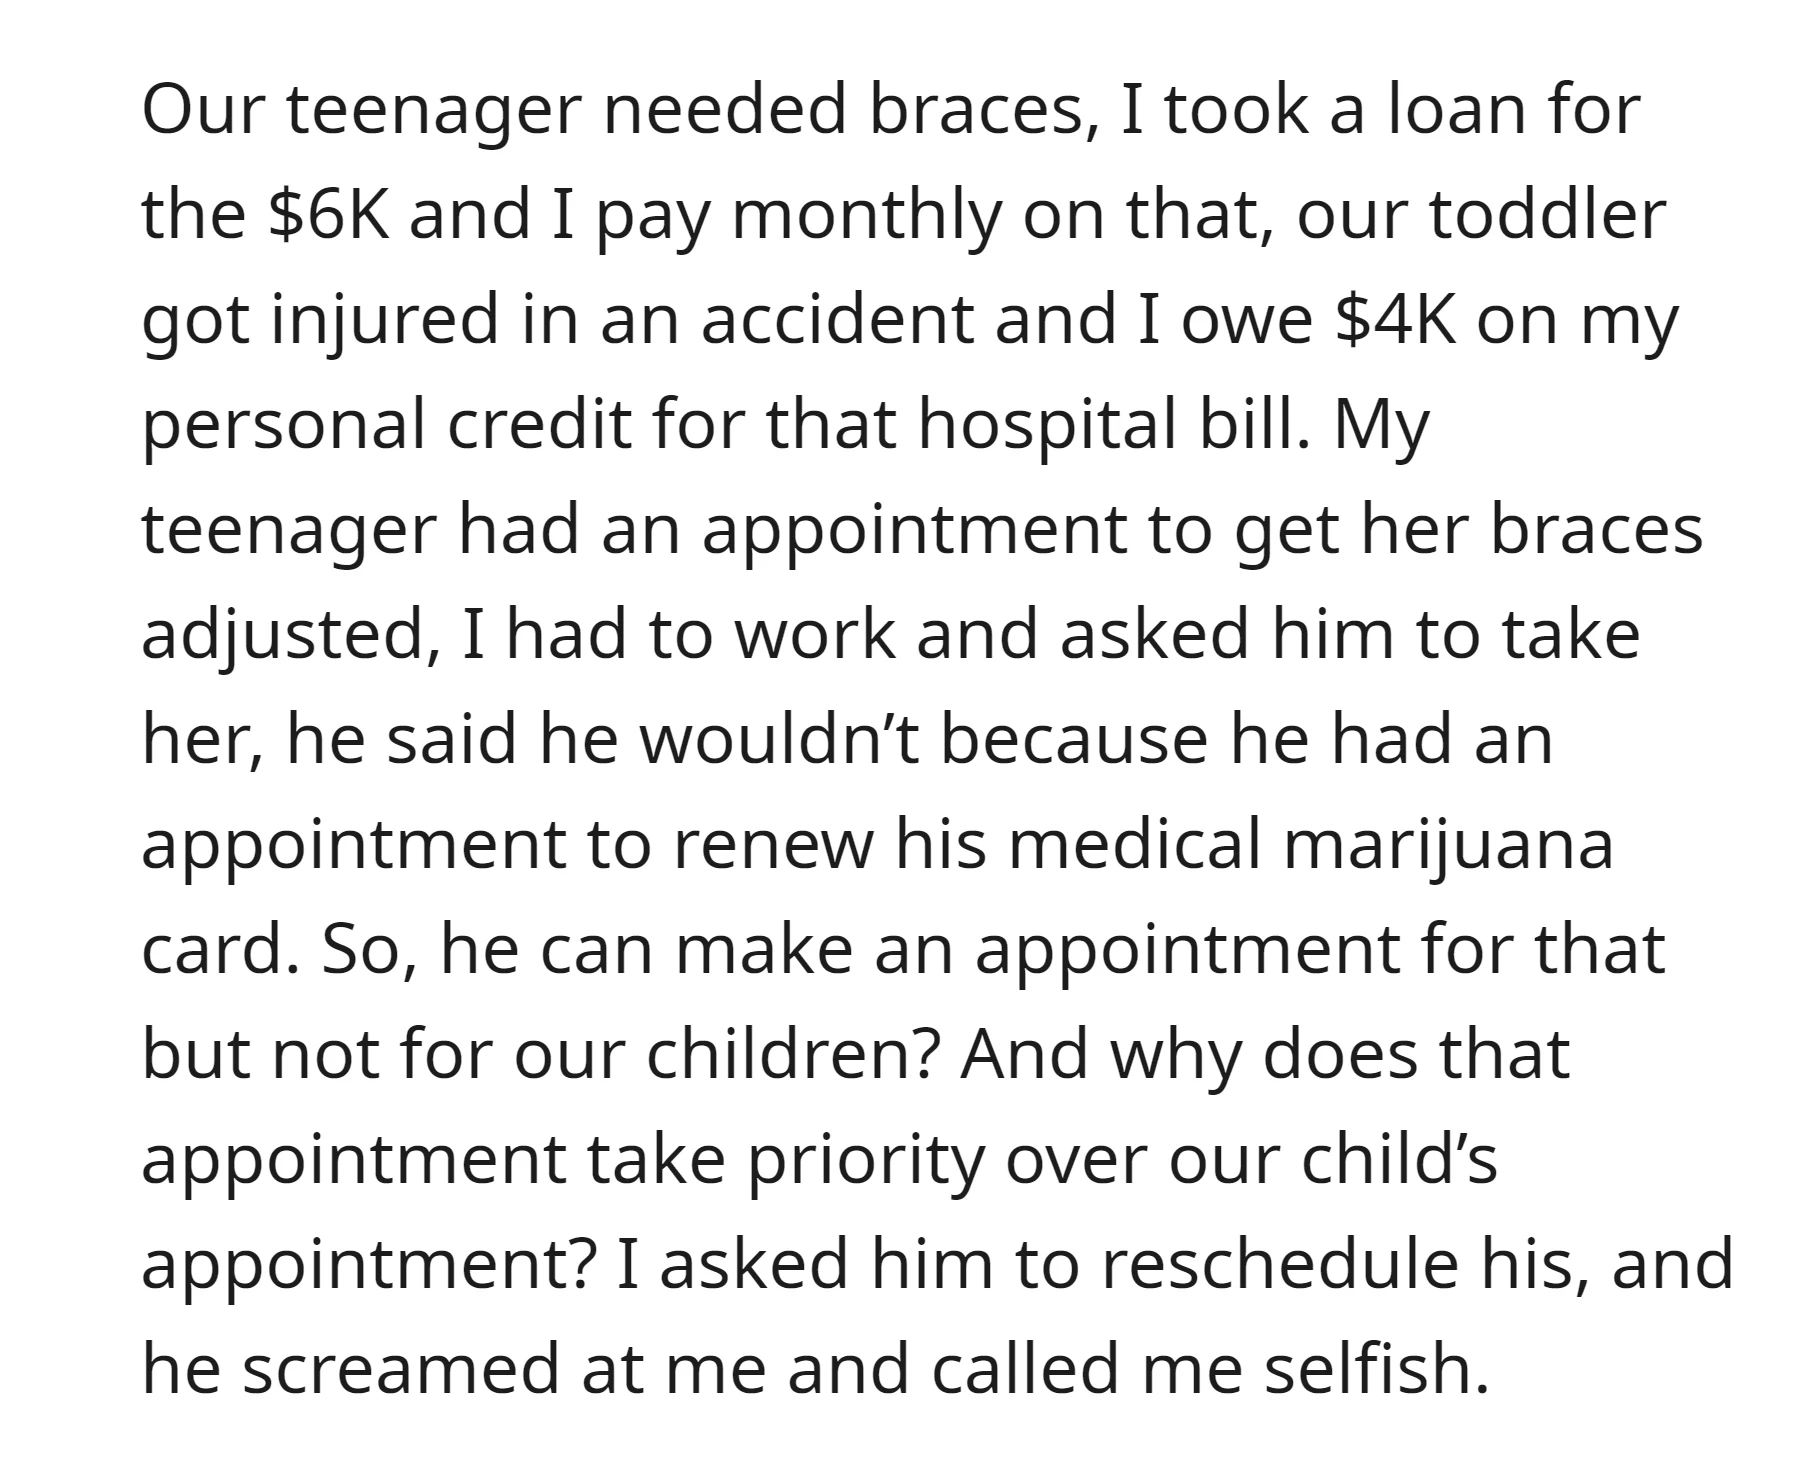 her husband prioritizes renewing his medical marijuana card over their child's orthodontic appointment